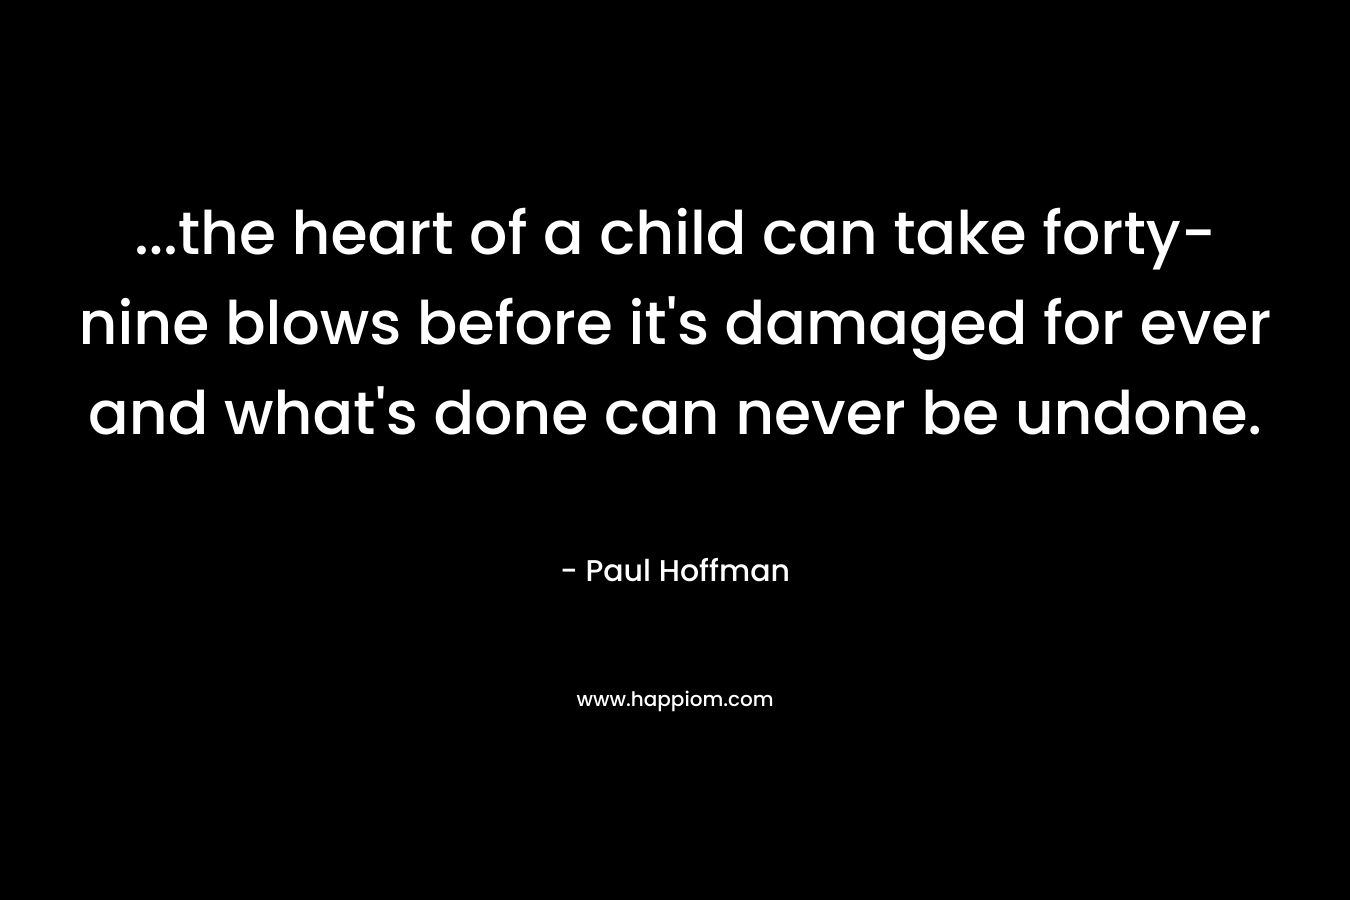 …the heart of a child can take forty-nine blows before it’s damaged for ever and what’s done can never be undone. – Paul Hoffman